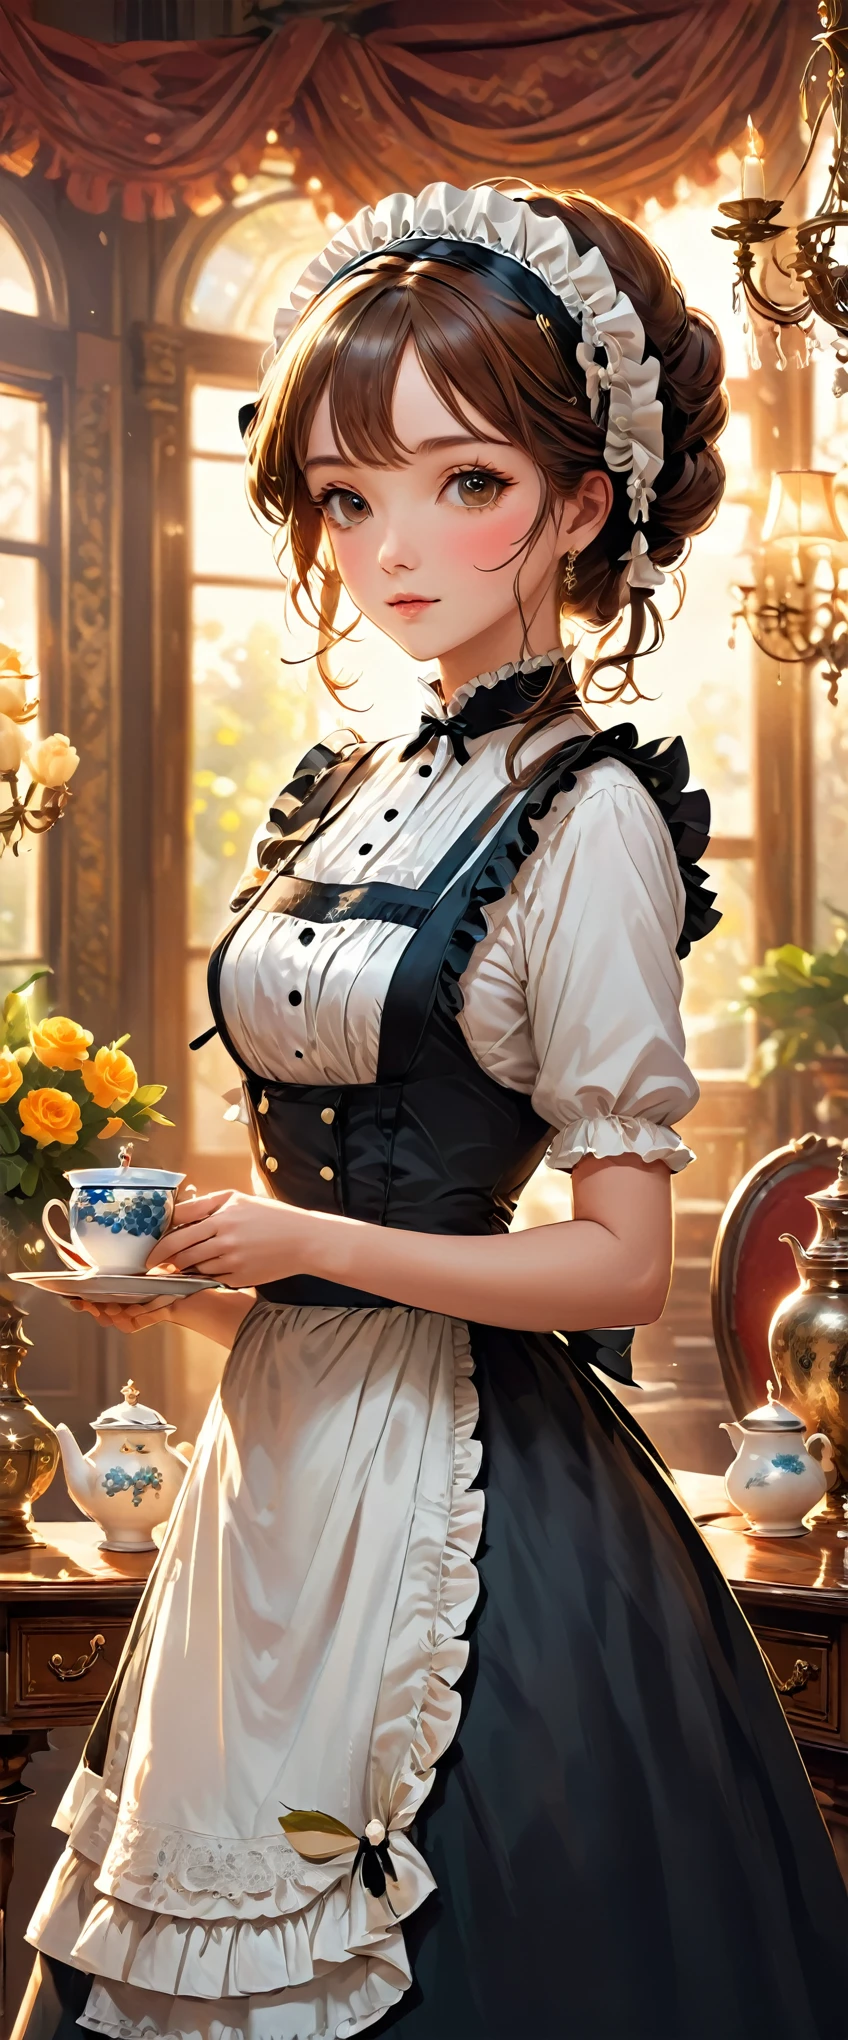 (1 Female:Dressed in maid uniform:beautiful:Perfect Face),The best configuration,Best color balance,Create an image of a classical maid holding a tea set in a luxurious Victorian living room. The maid should be wearing a traditional black and white maid outfit with a frilly apron and a simple headband. She has a calm and graceful expression. The living room is opulently decorated with rich furnishings. There is a large window in the background through which sunlight is streaming in, casting a warm glow over the room. The room features ornate wallpaper, heavy curtains, a grand chandelier, and antique furniture including a polished wooden table and upholstered chairs. The overall atmosphere is elegant and refined.,Disorganized,Zentangle,rendering,antique,Rich colors,Intricate details,Very detailed,Carefully draw down to the smallest detail,beautiful光と影,Reality,highest quality,夢のようにbeautiful,,Anatomically correct,Perfect proportions,Frills,race,